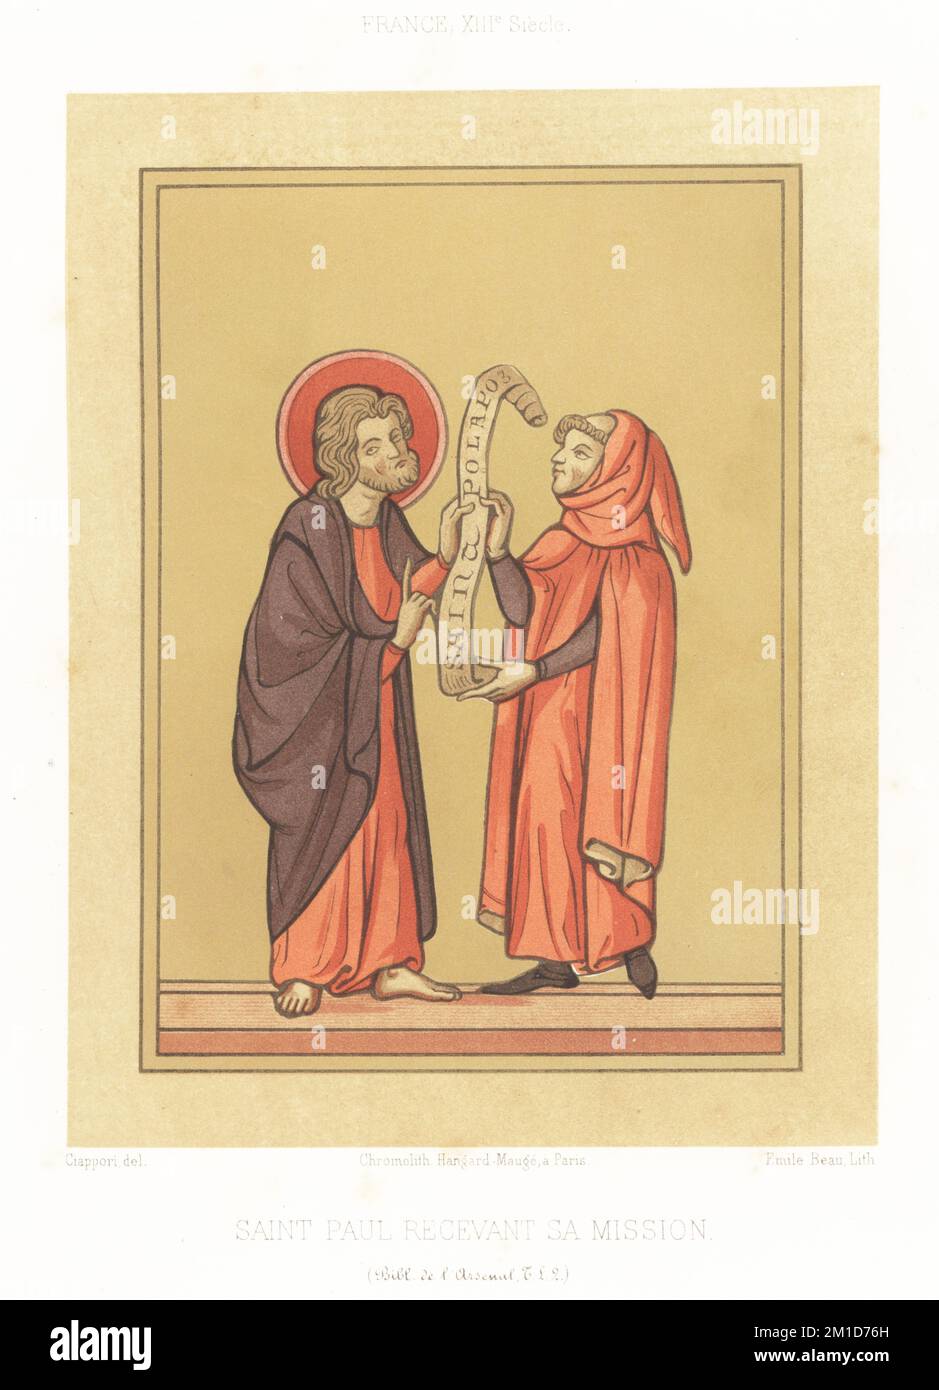 Saint Paul in monk's habit and capuchon hood receiving his mission Seirapoledos from God in a halo. Saint Paul recevant sa mission. From the Letter to the Galatians in a manuscript Bible, MS T.L. 2, Bibliotheque de l'Arsenal, 13th century. France, XIIIe Siecle. Chromolithograph by Emile Beau after an illustration by Claudius Joseph Ciappori from Charles Louandre’s Les Arts Somptuaires, The Sumptuary Arts, Hangard-Mauge, Paris, 1858. Stock Photo